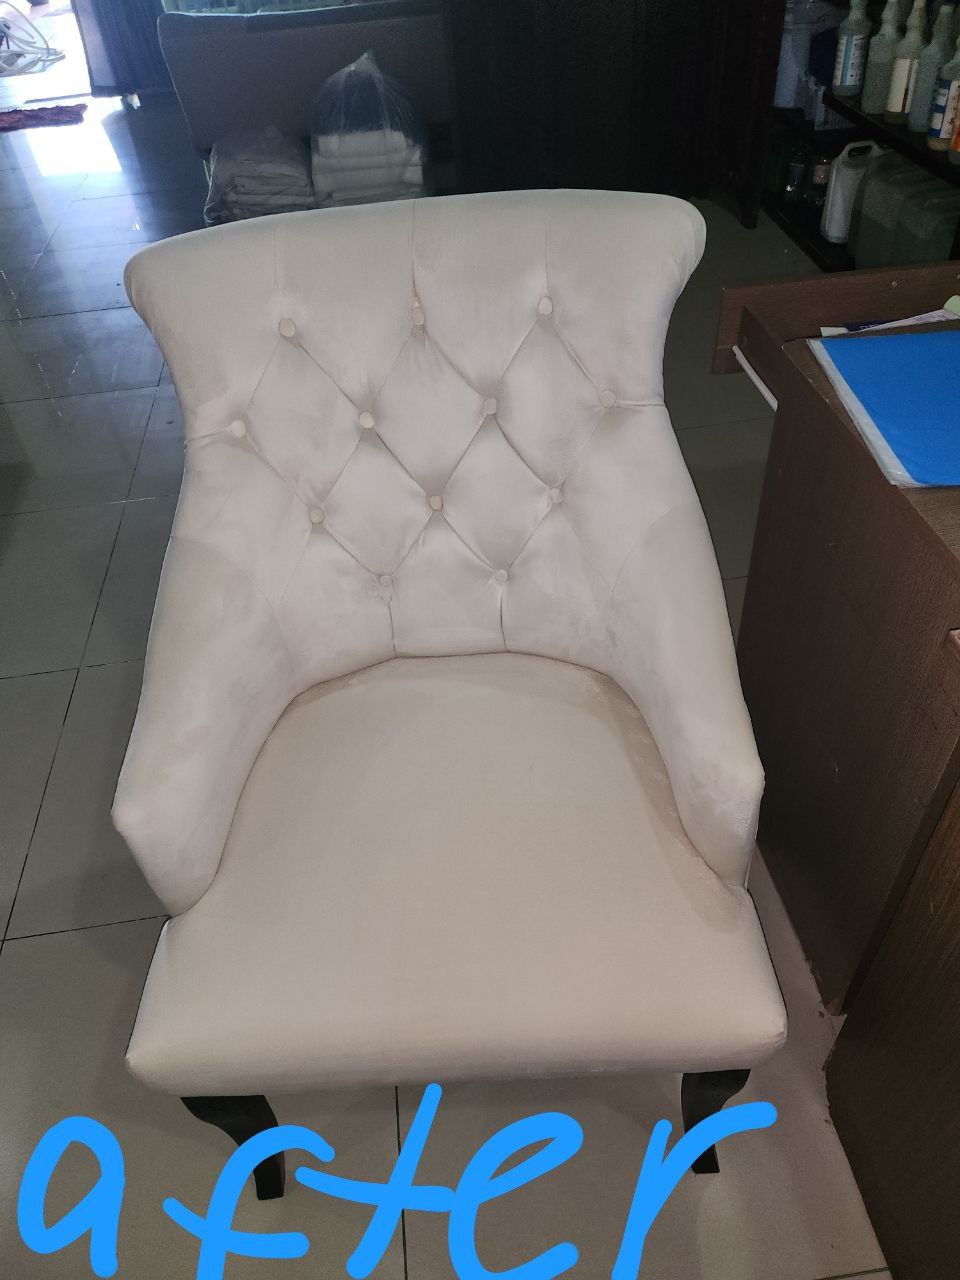 Dry cleaning chair